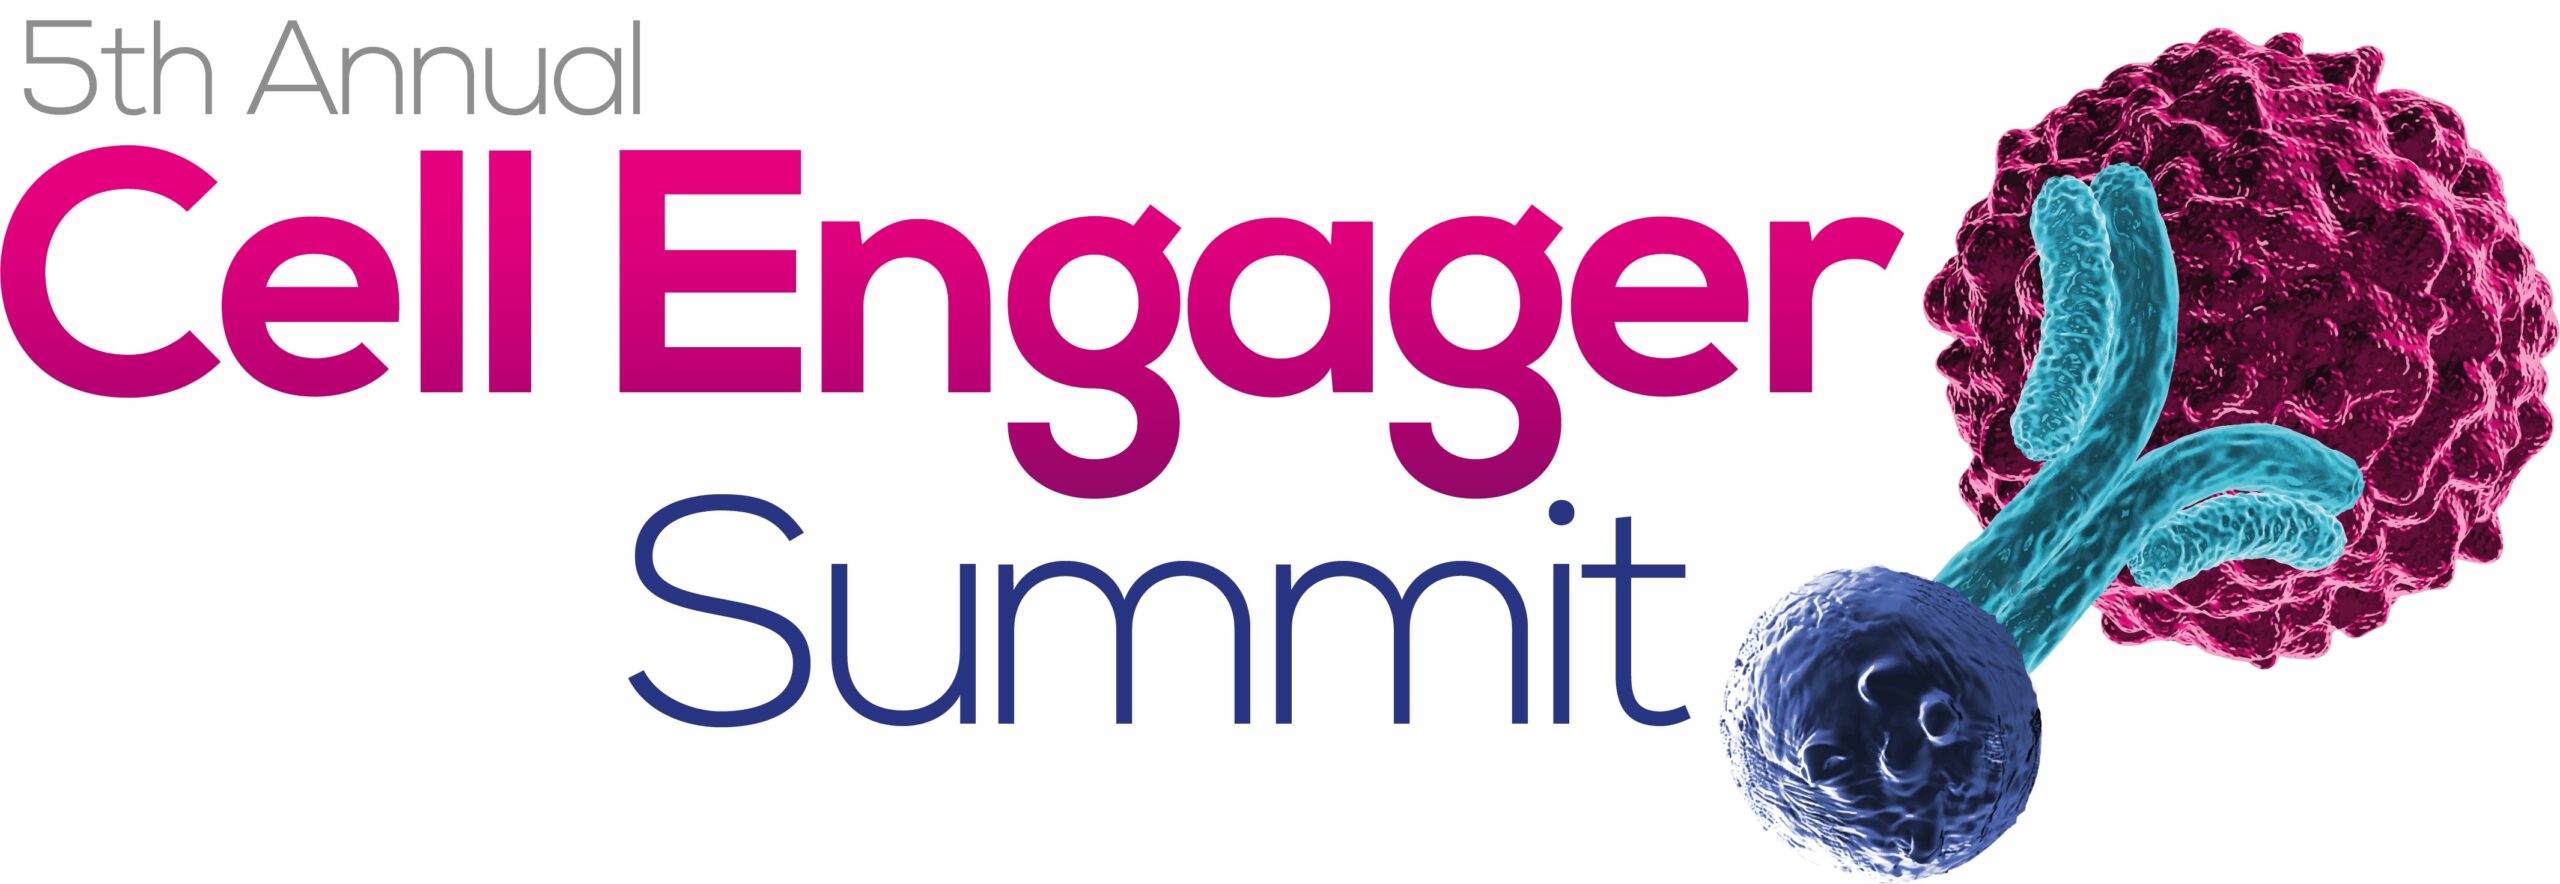 HW221201 5th Cell Engager Therapeutics Summit logo